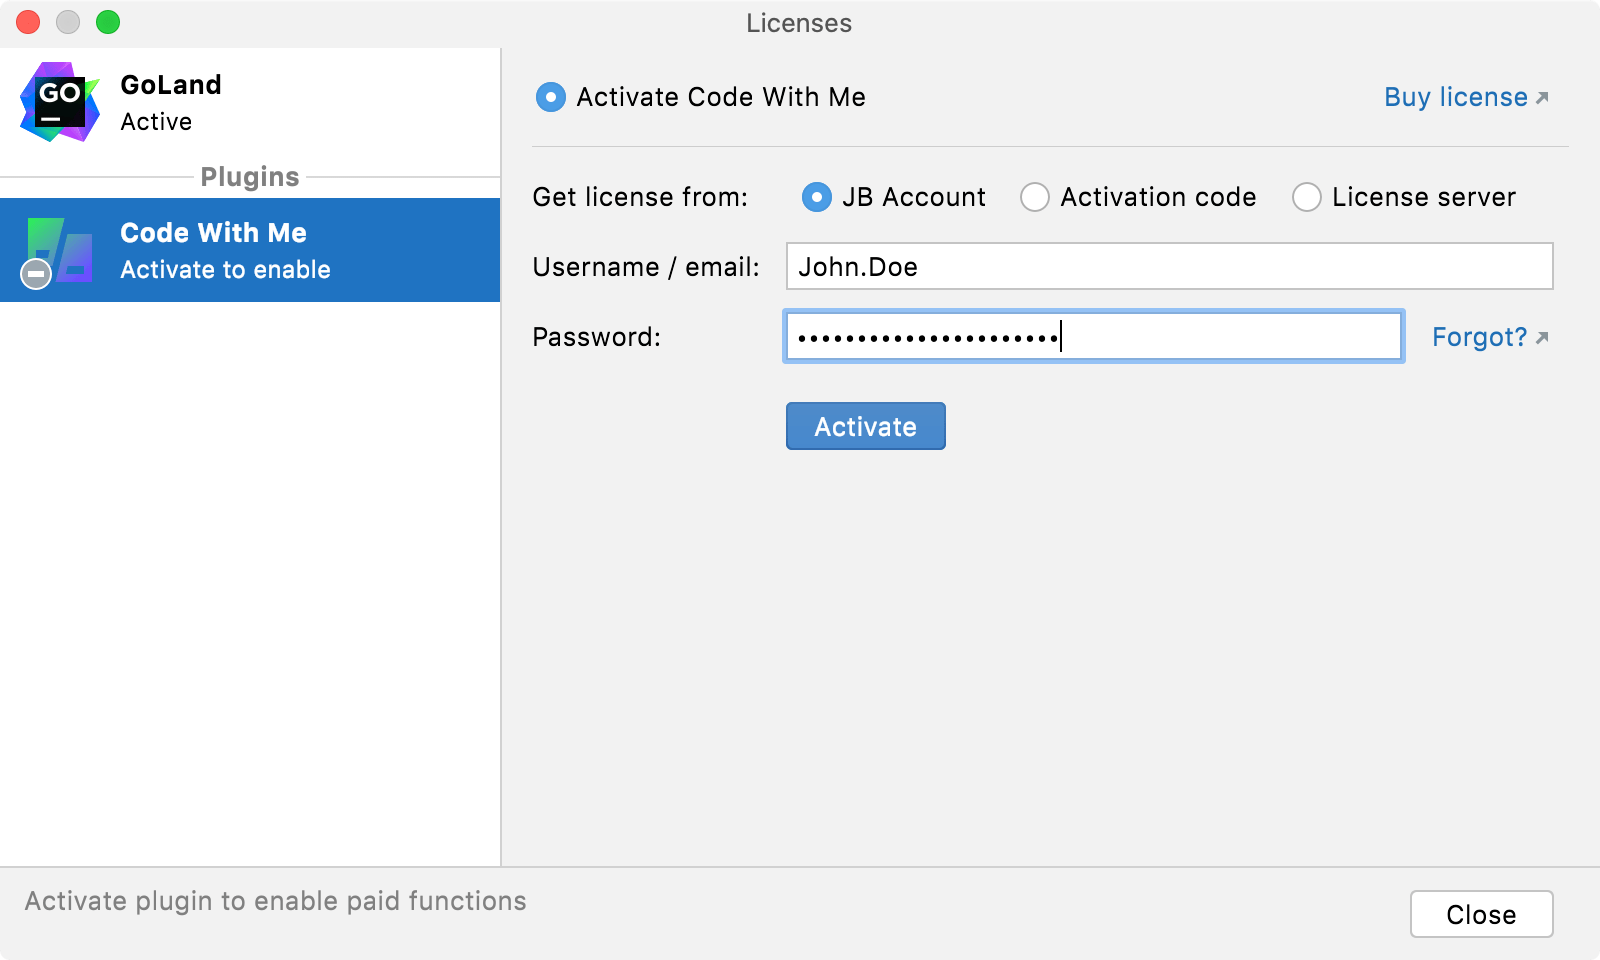 The License Activation dialog